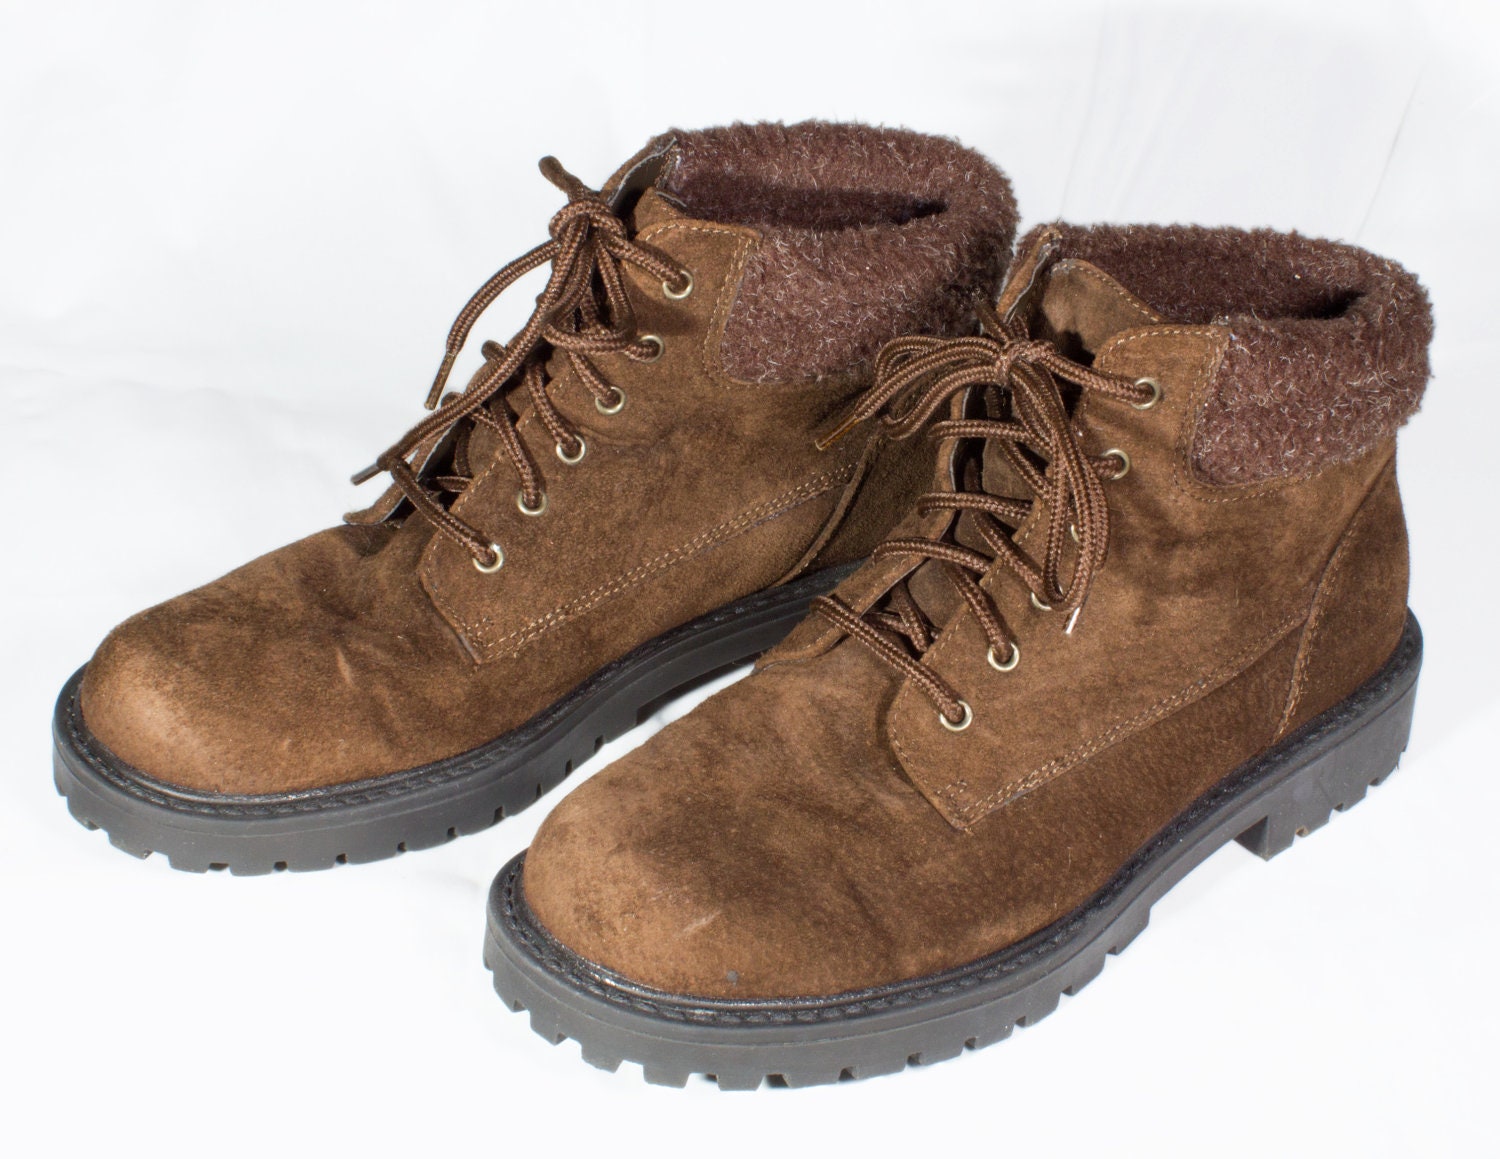 VTG 90's Chocolate Brown Suede Hiking Boots Womens size